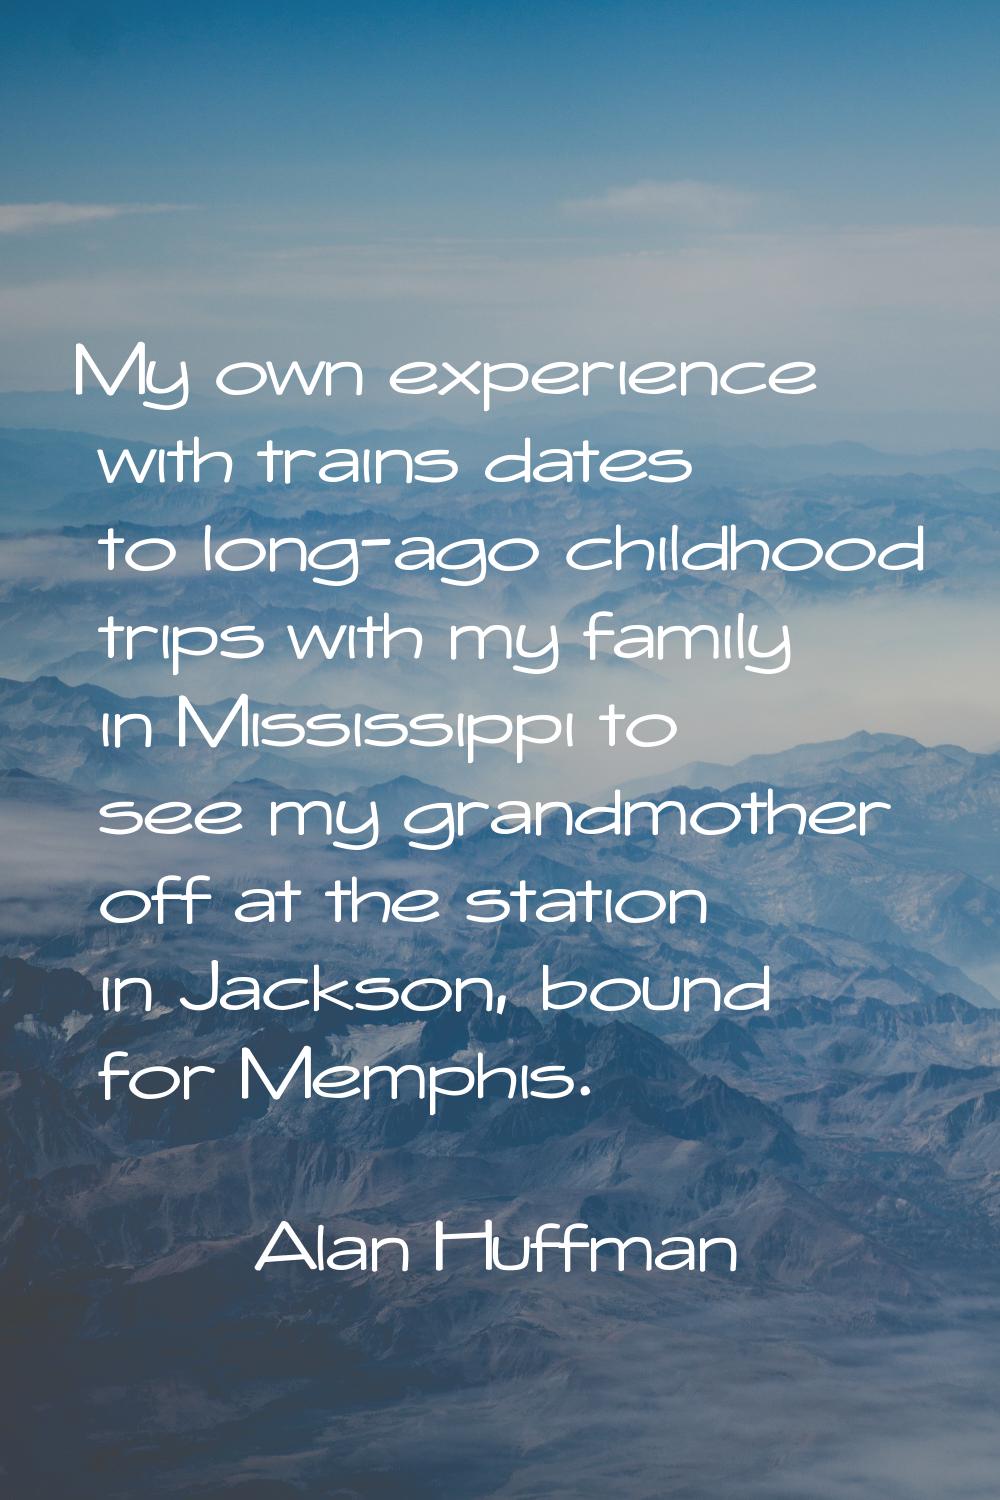 My own experience with trains dates to long-ago childhood trips with my family in Mississippi to se